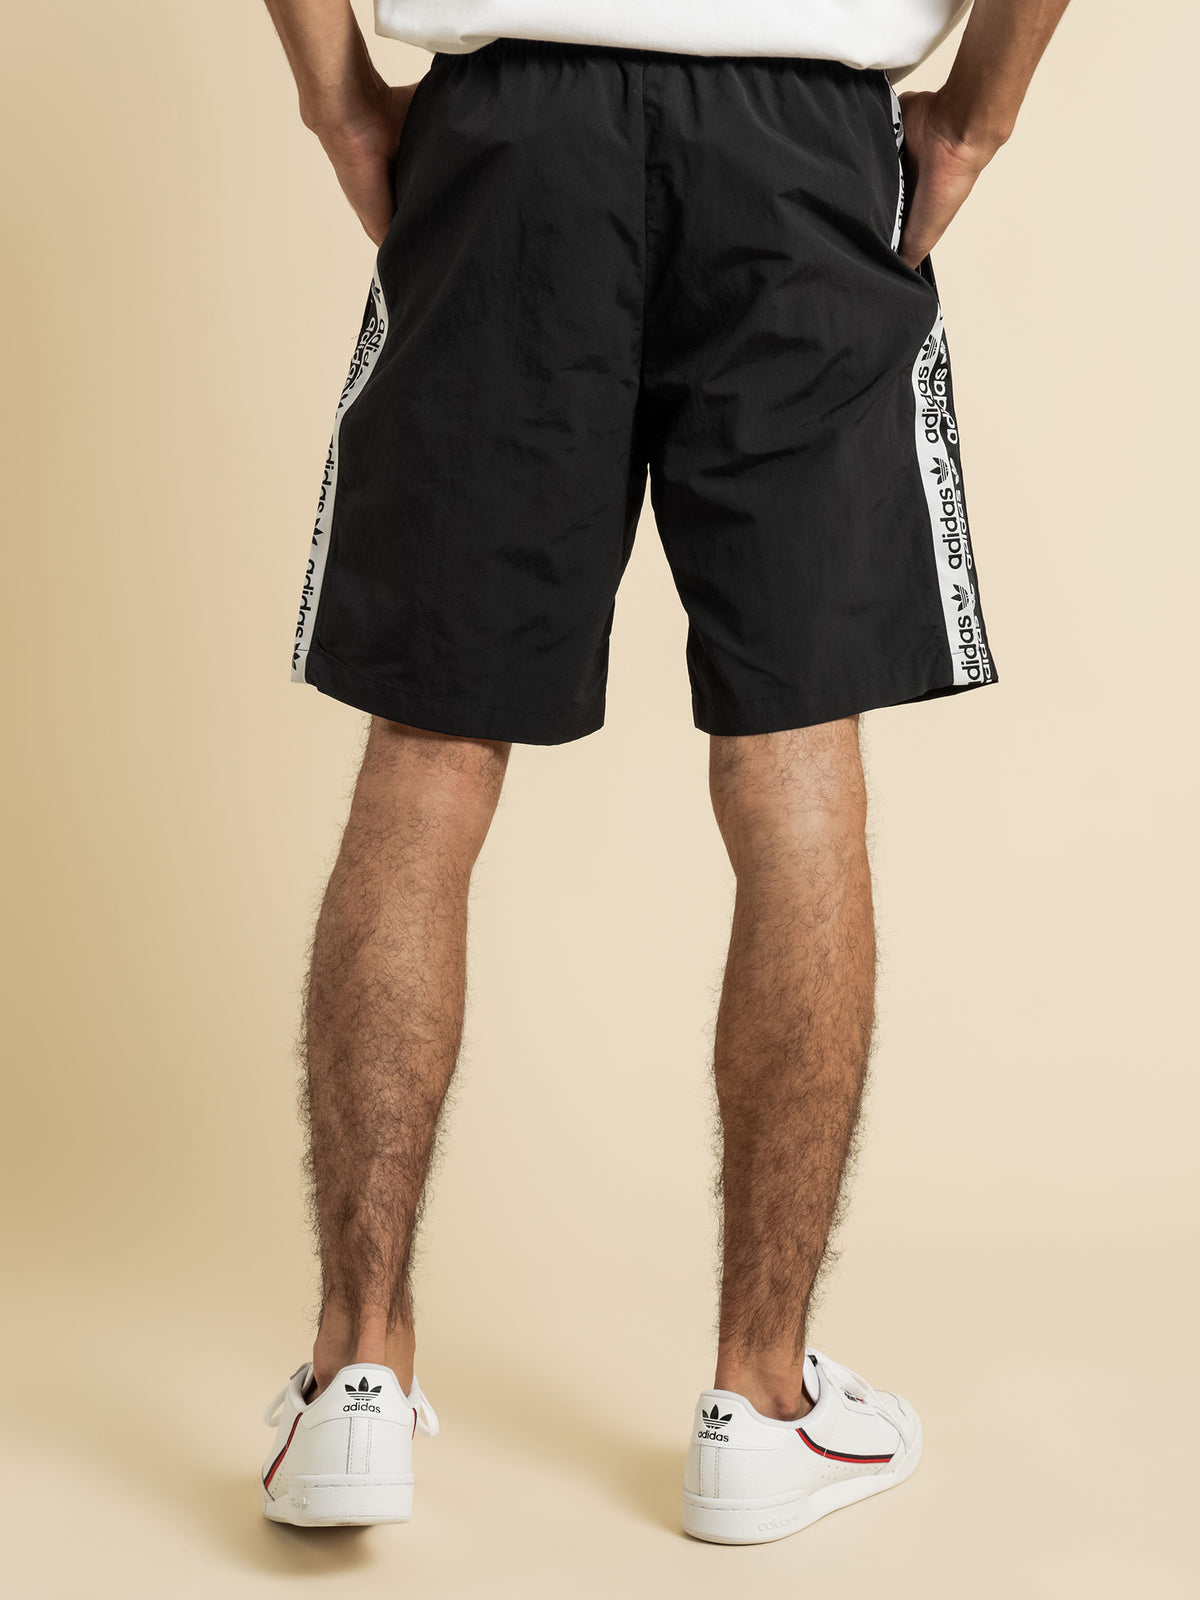 RYV Woven Shorts in Black